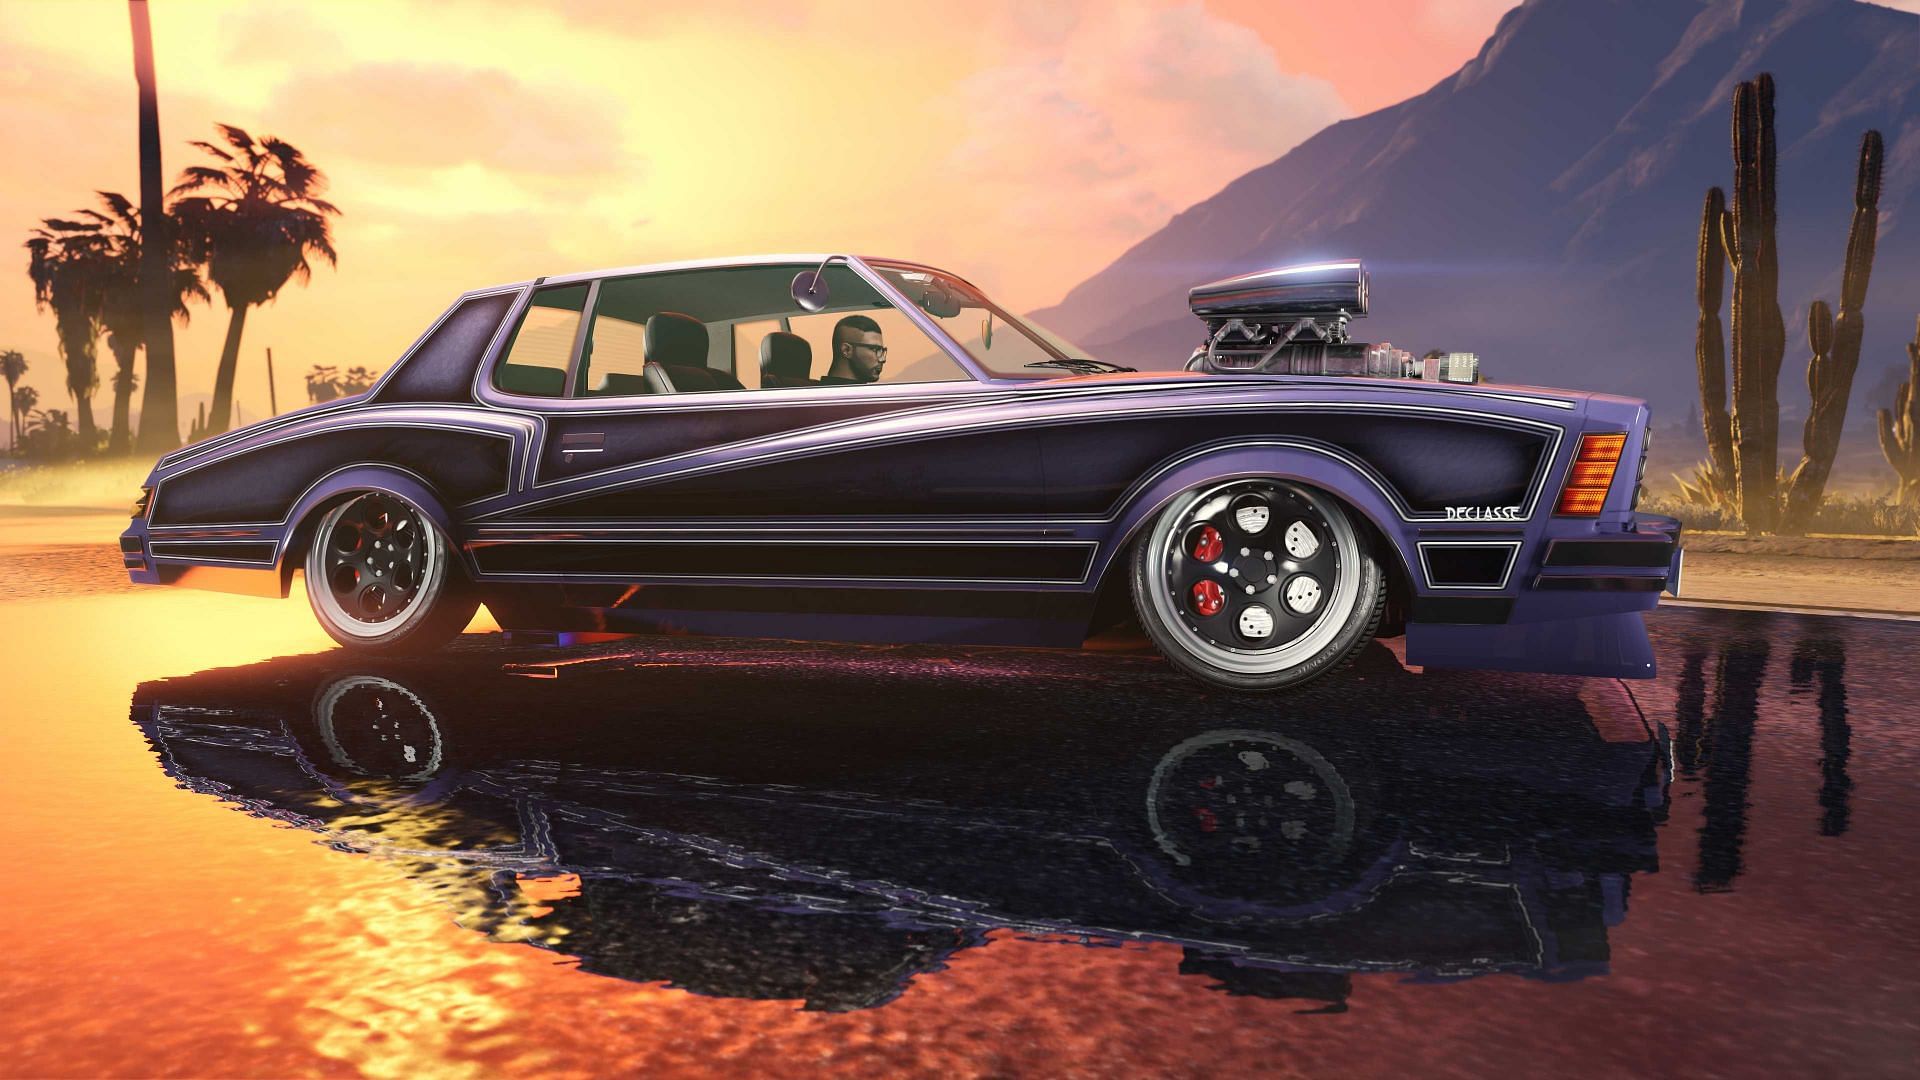 You can get this car for free since GTA Online players passed The Heists Challenge 2022 (Image via Rockstar Games)